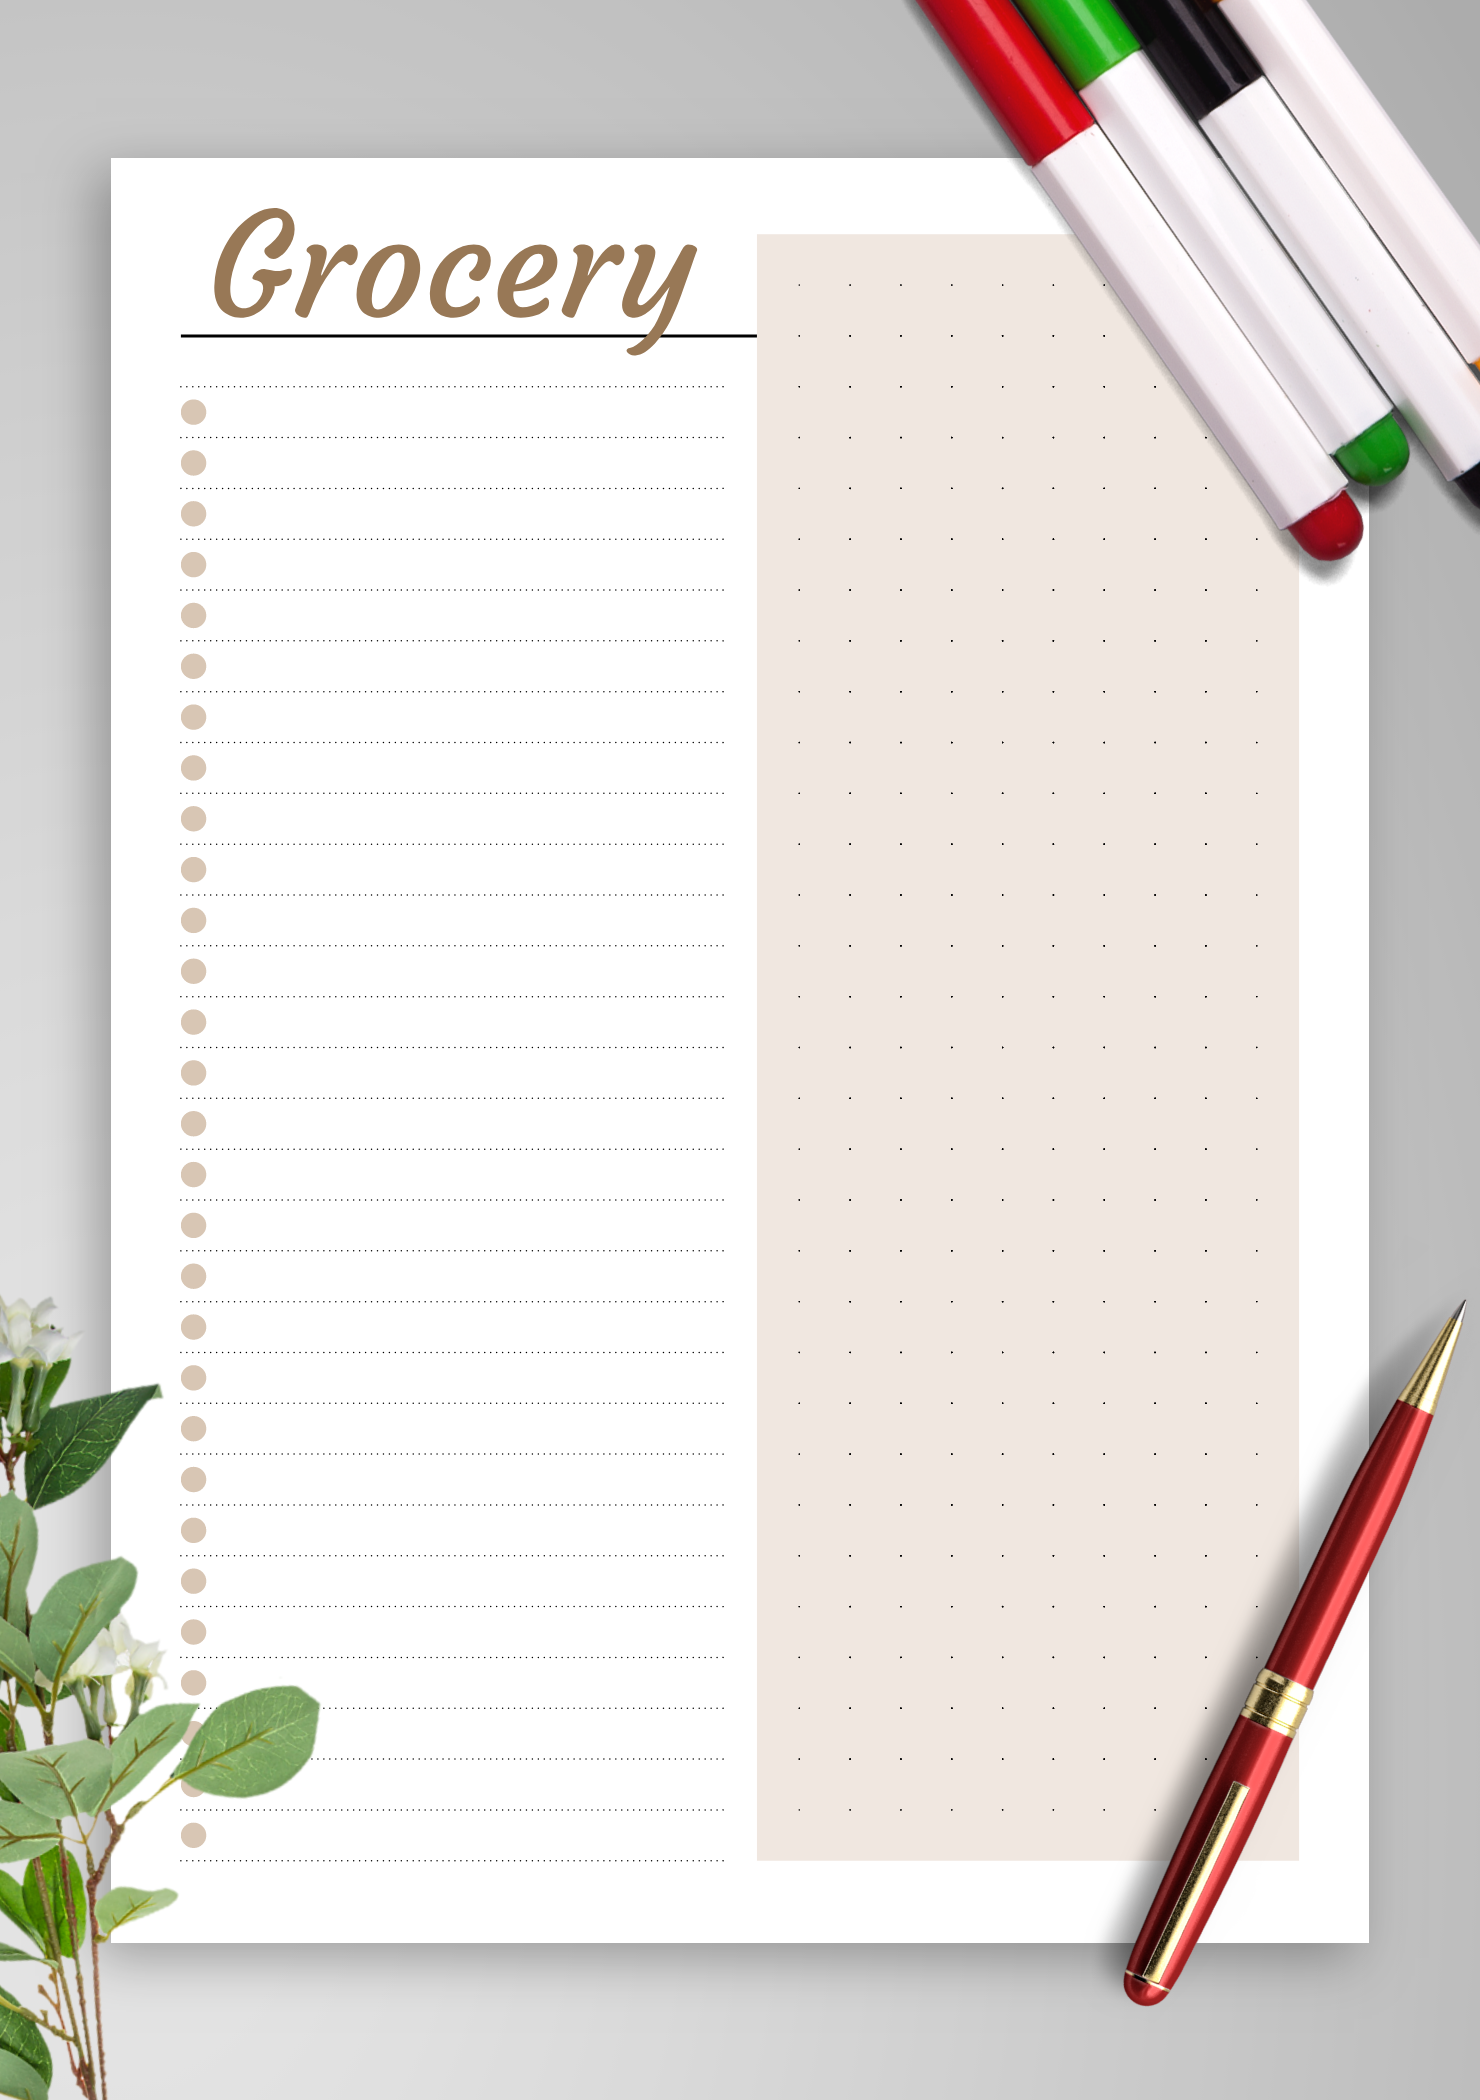 Blank Grocery List Template Basic Format Grocery List Template Images